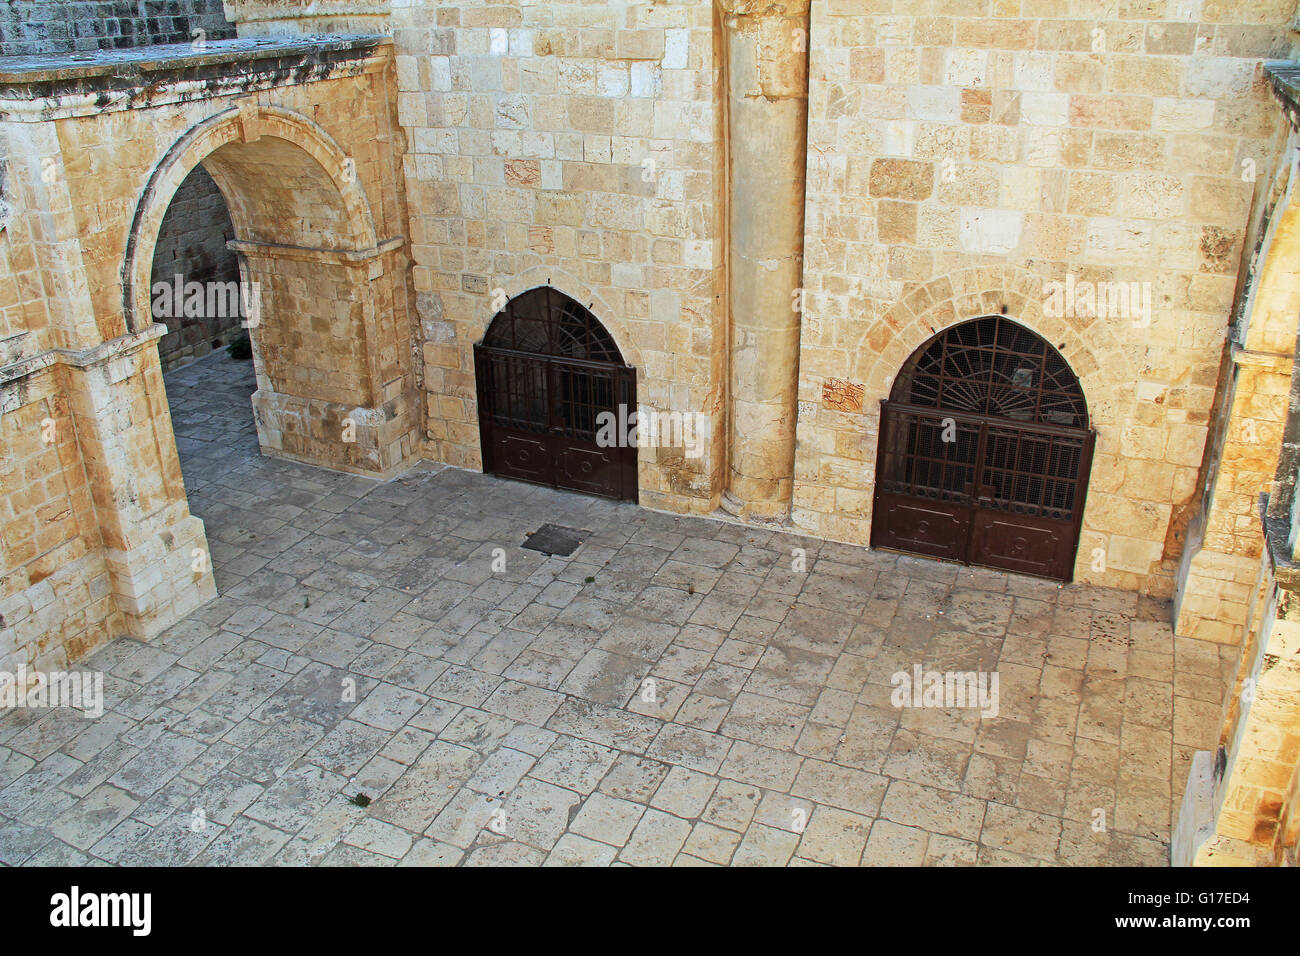 Inside the Golden Gate, also known as the Eastern Gate as seen from the Temple Mount in Old Jerusalem, Israel. Stock Photo